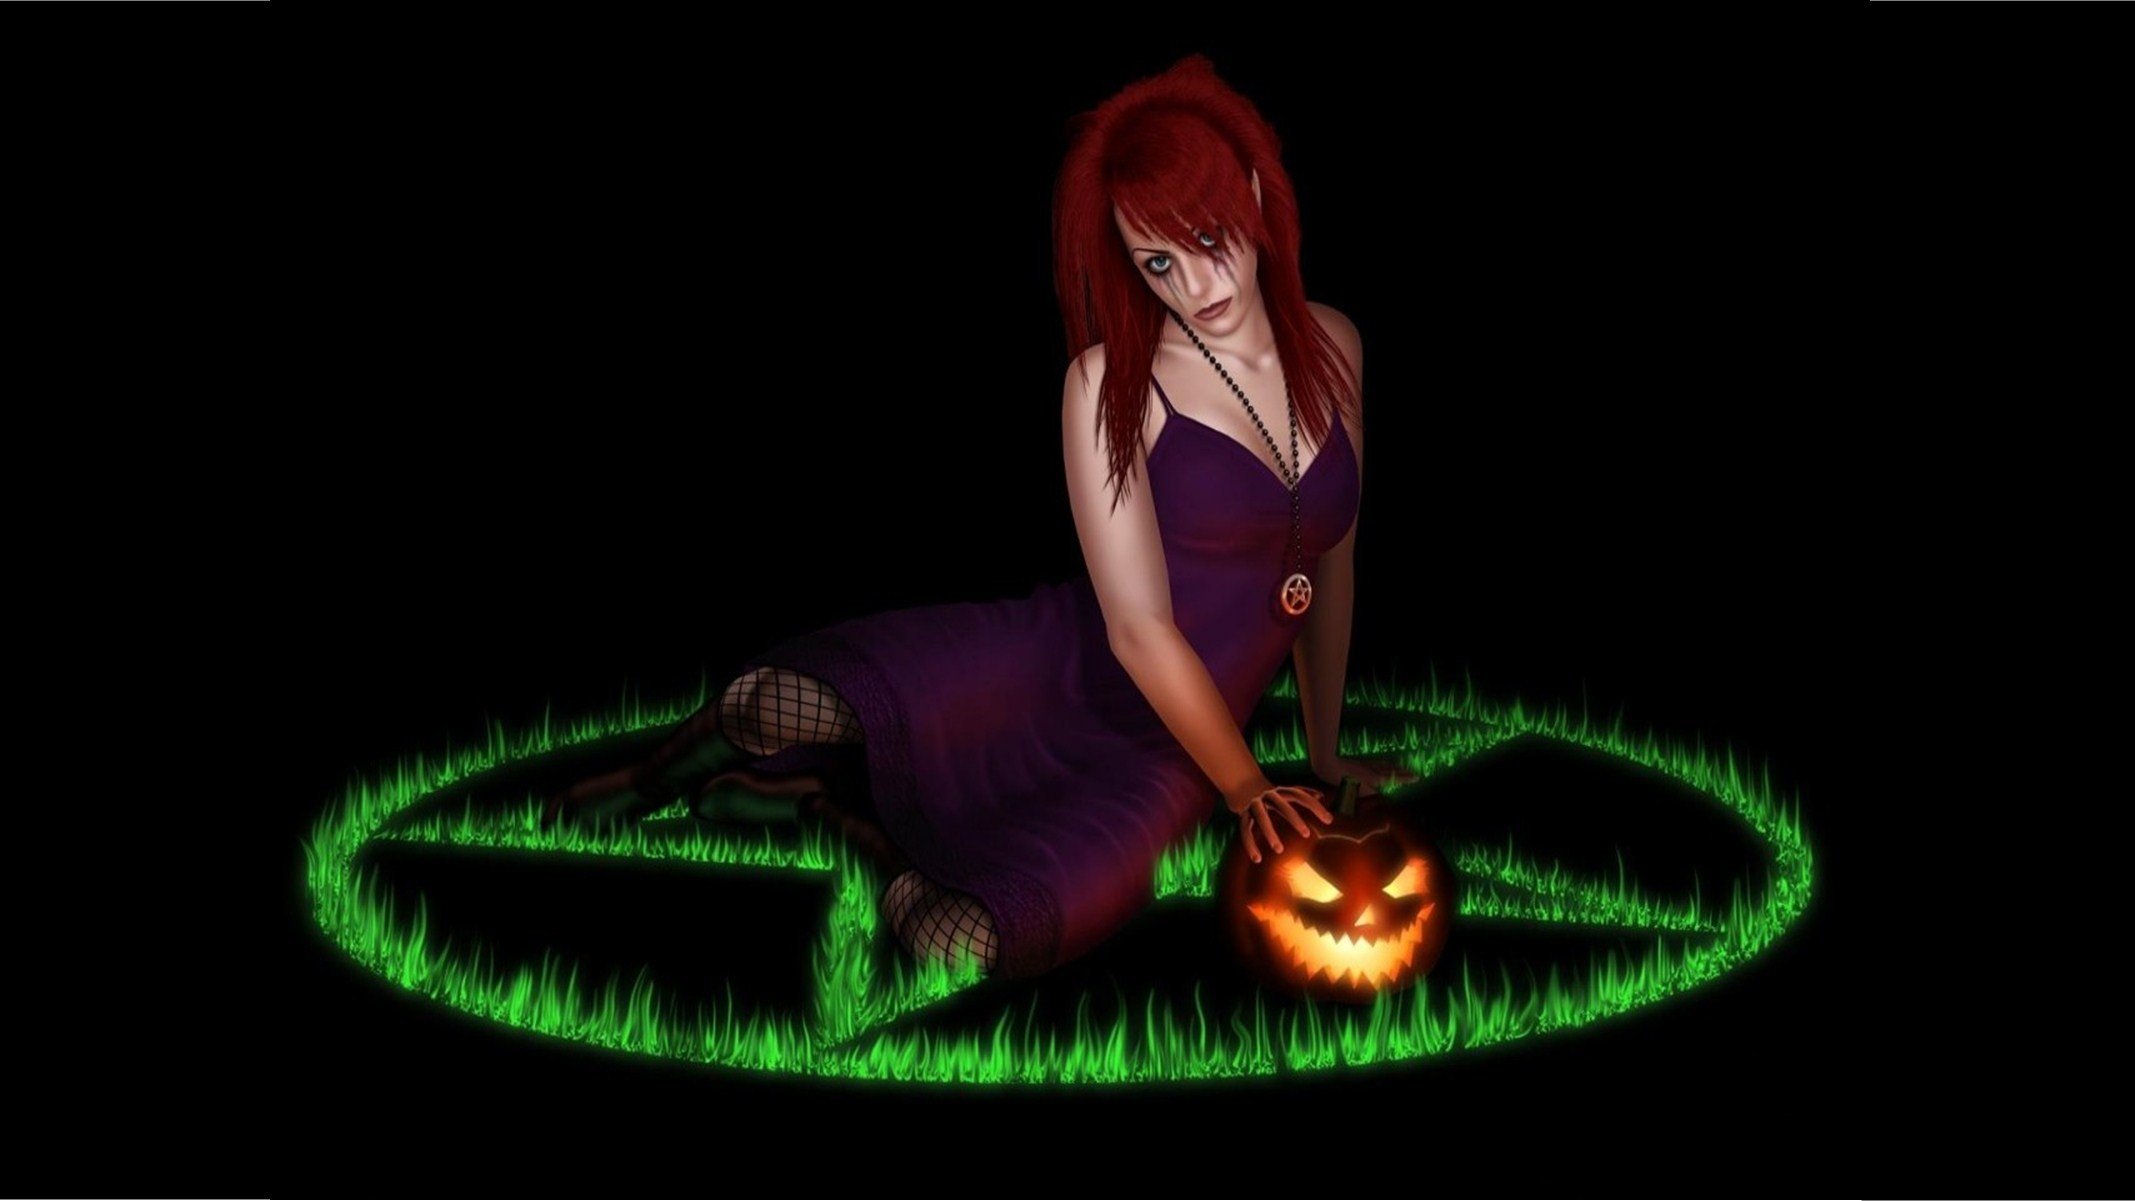 the witch and pentagram Wallpaper Background 27049